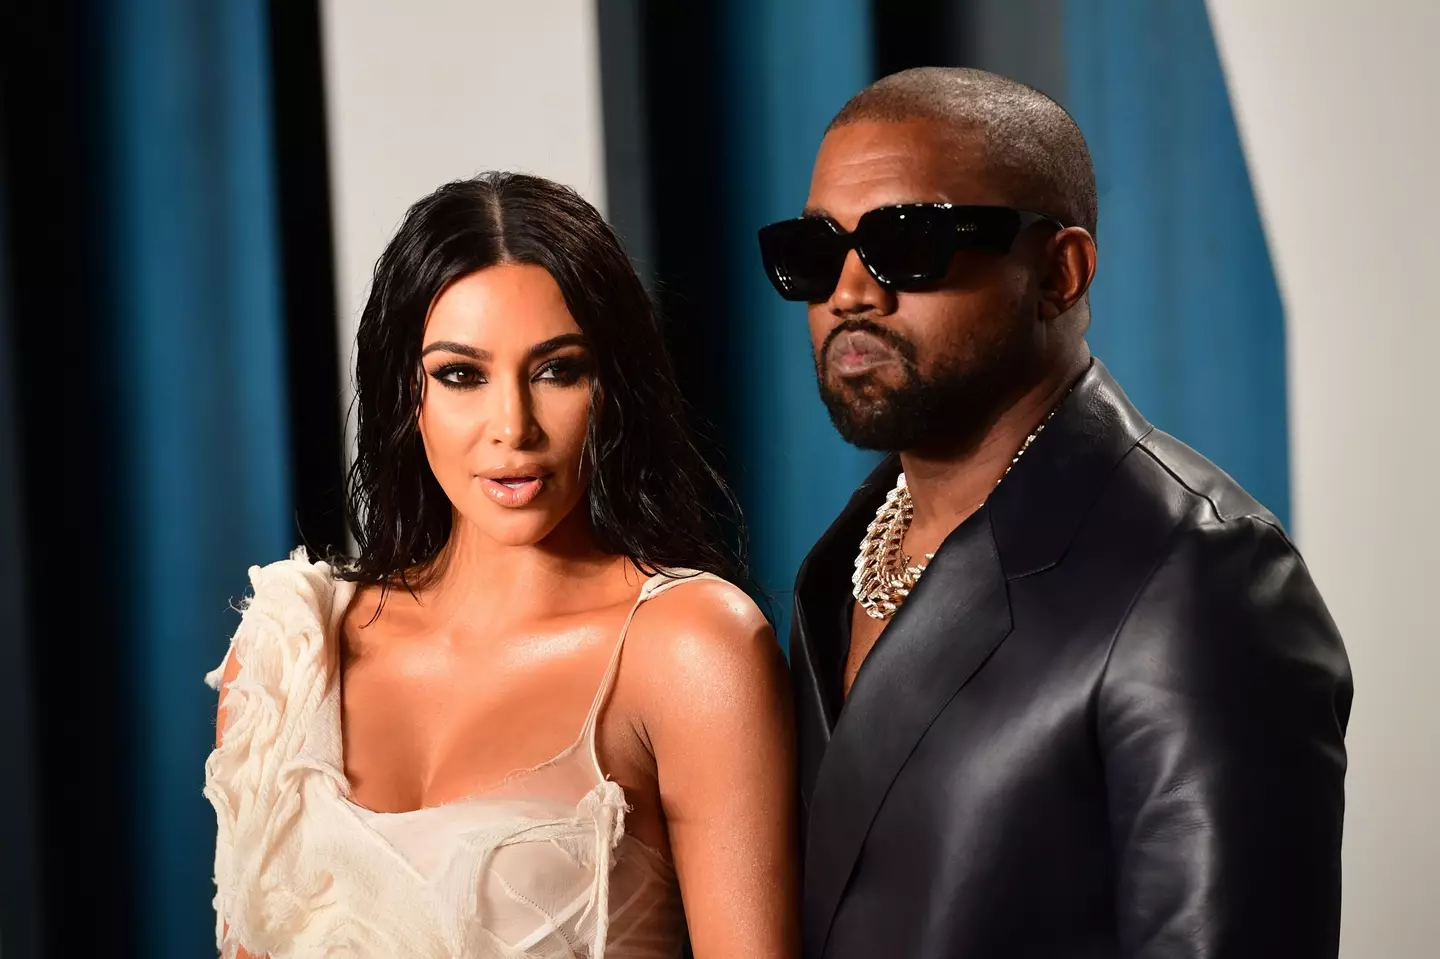 Kim and Kanye divorced in 2021 and things have gone sharply downhill ever since then.